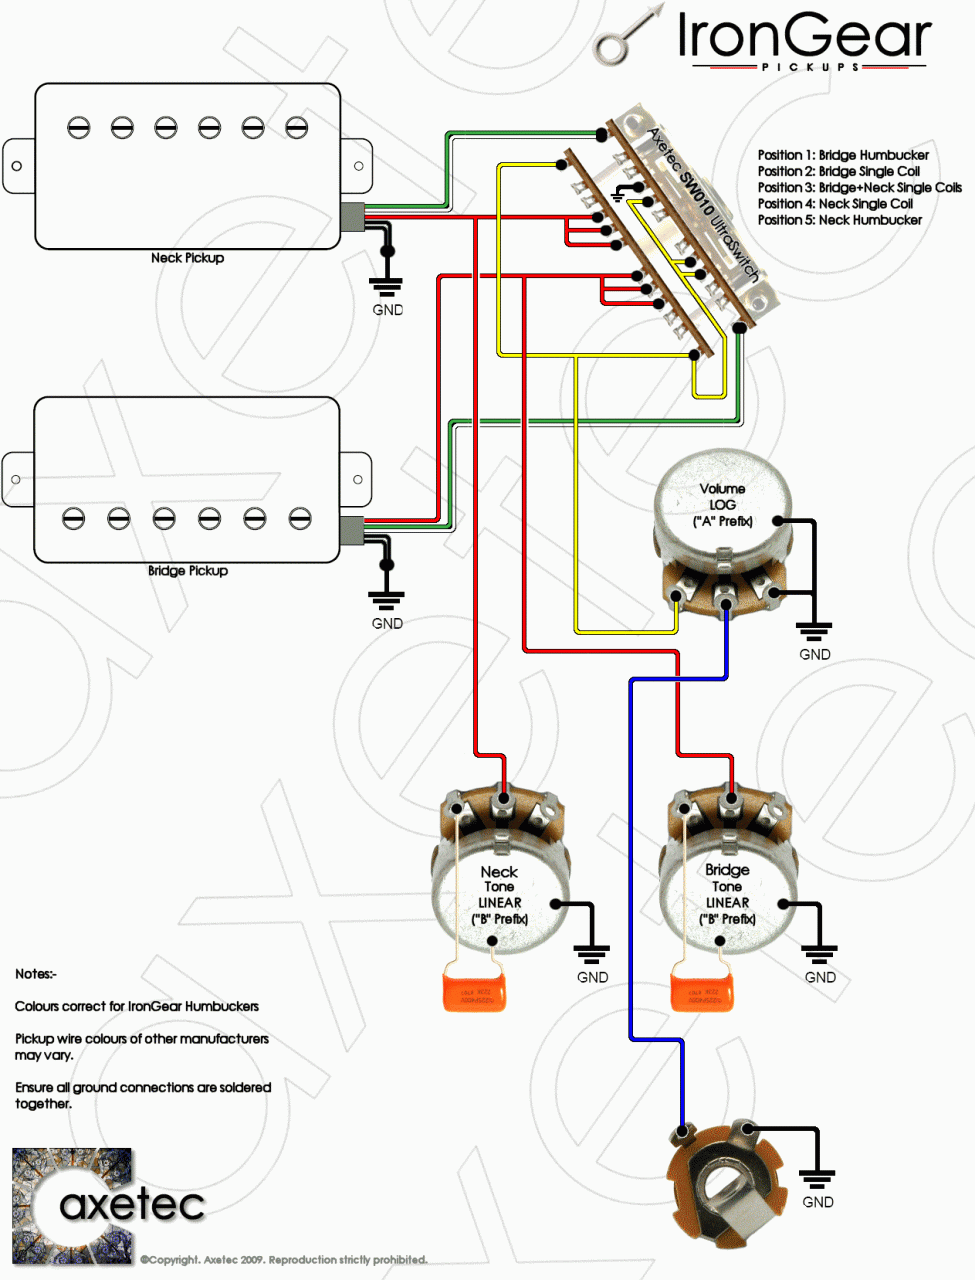 Guitar wiring diagram confusion Music Practice & Theory Stack Exchange